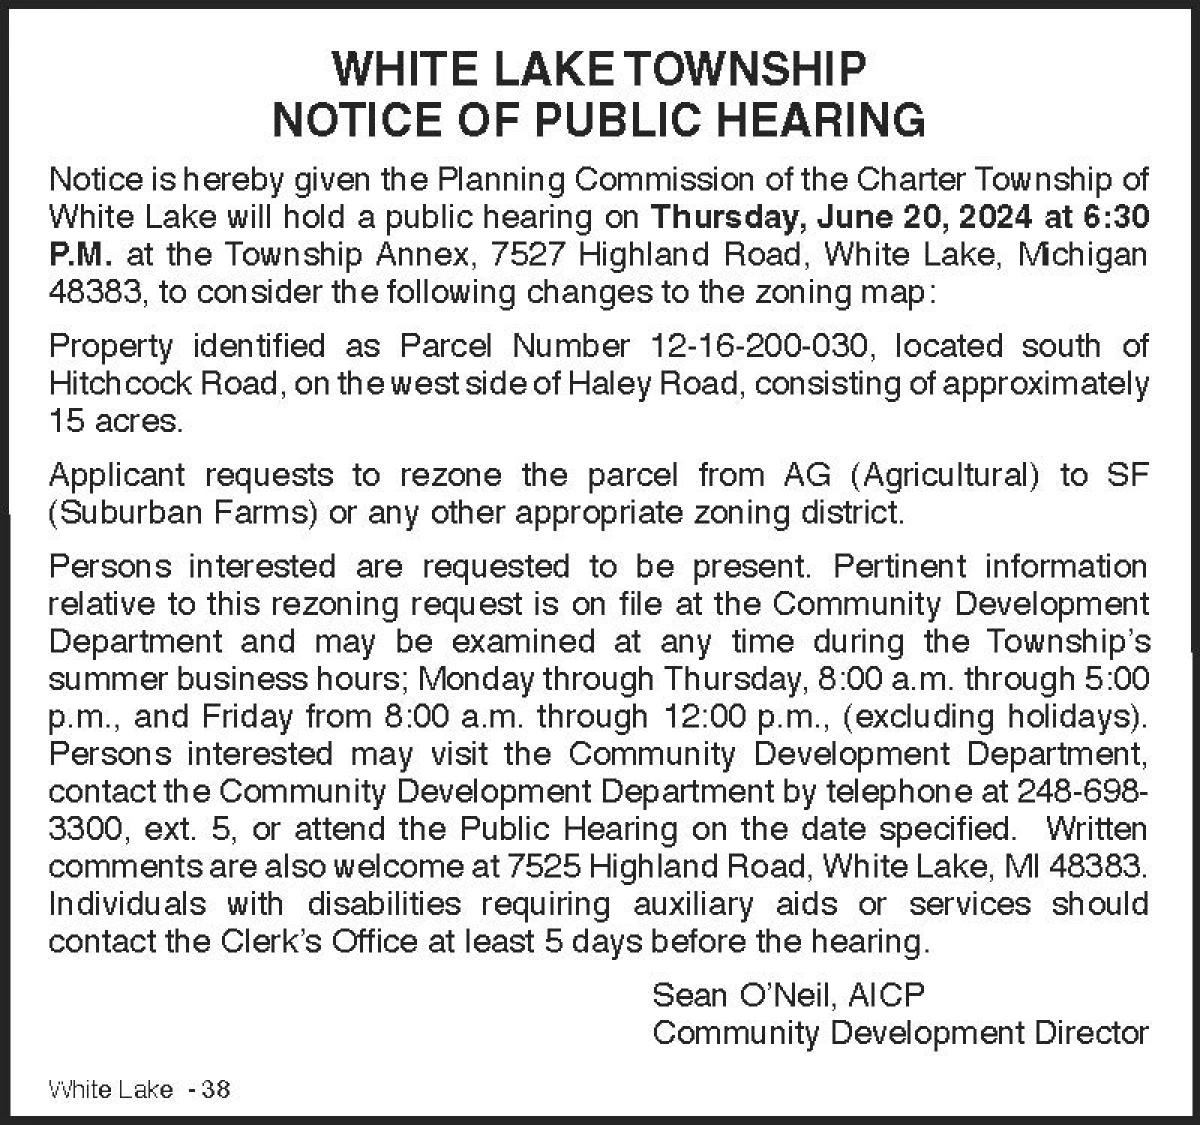 Public hearing notice to rezone vacant parcel 12-16-200-020